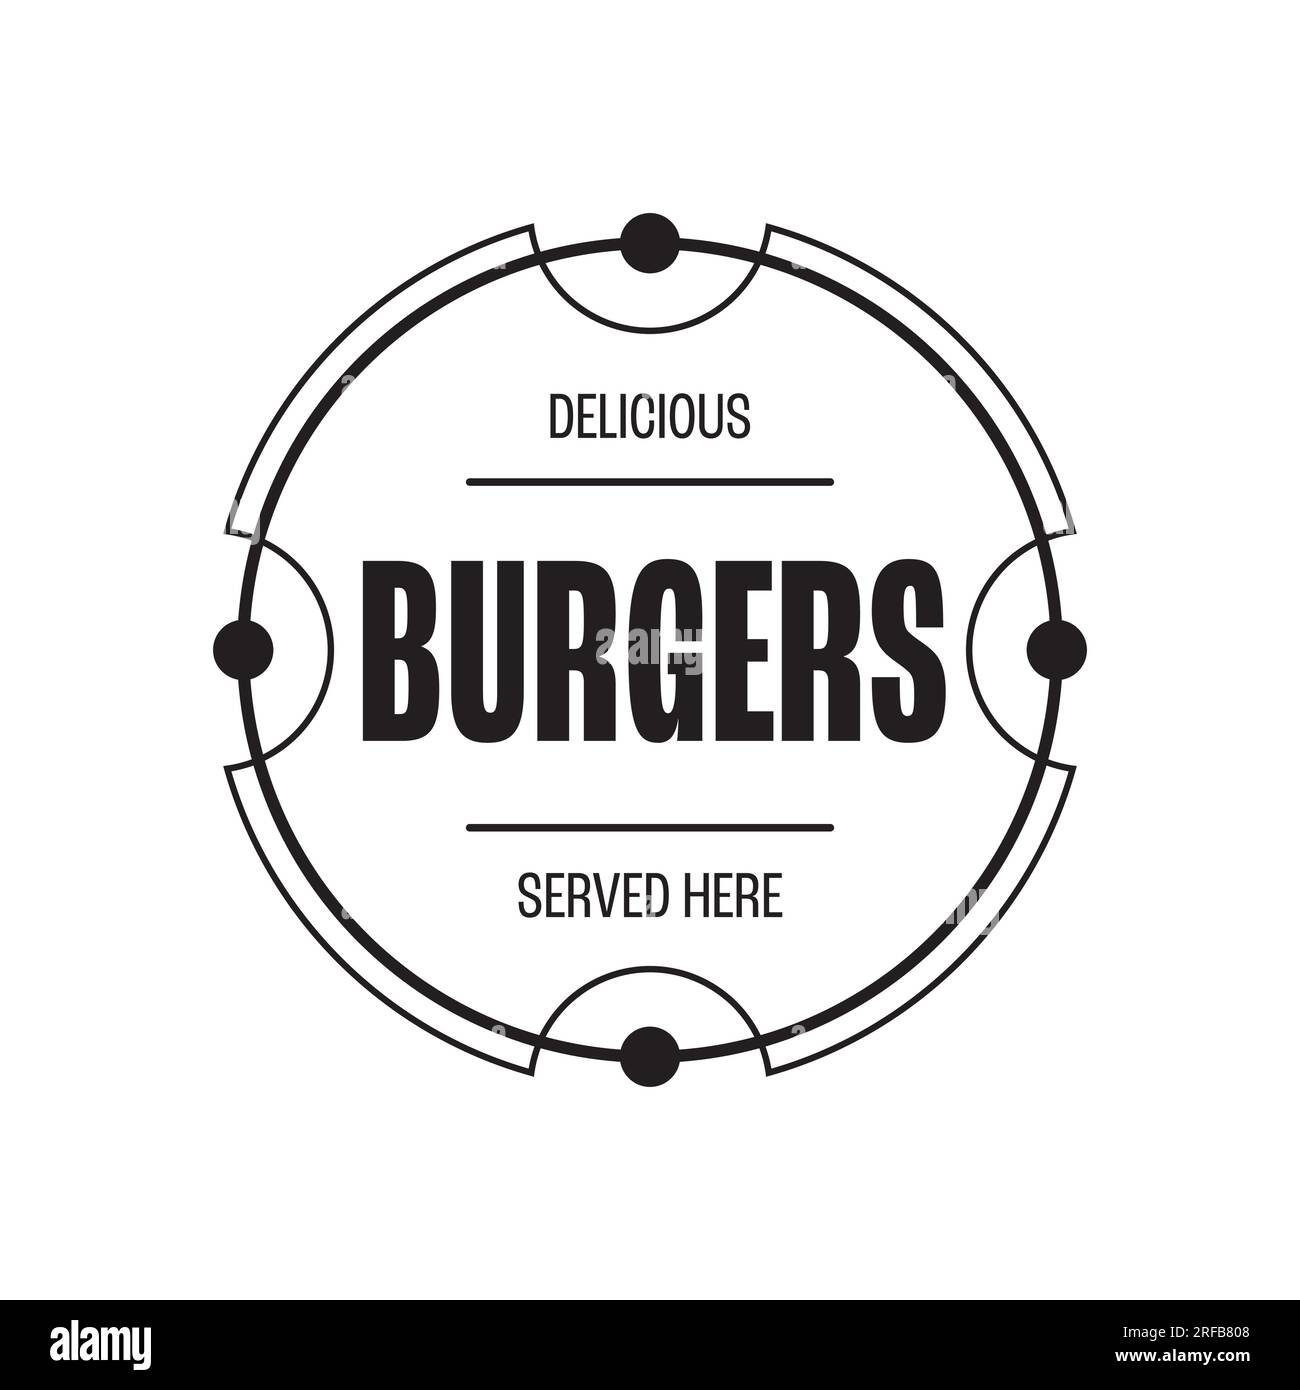 Delicious Burgers cintage stamp sign Stock Vector